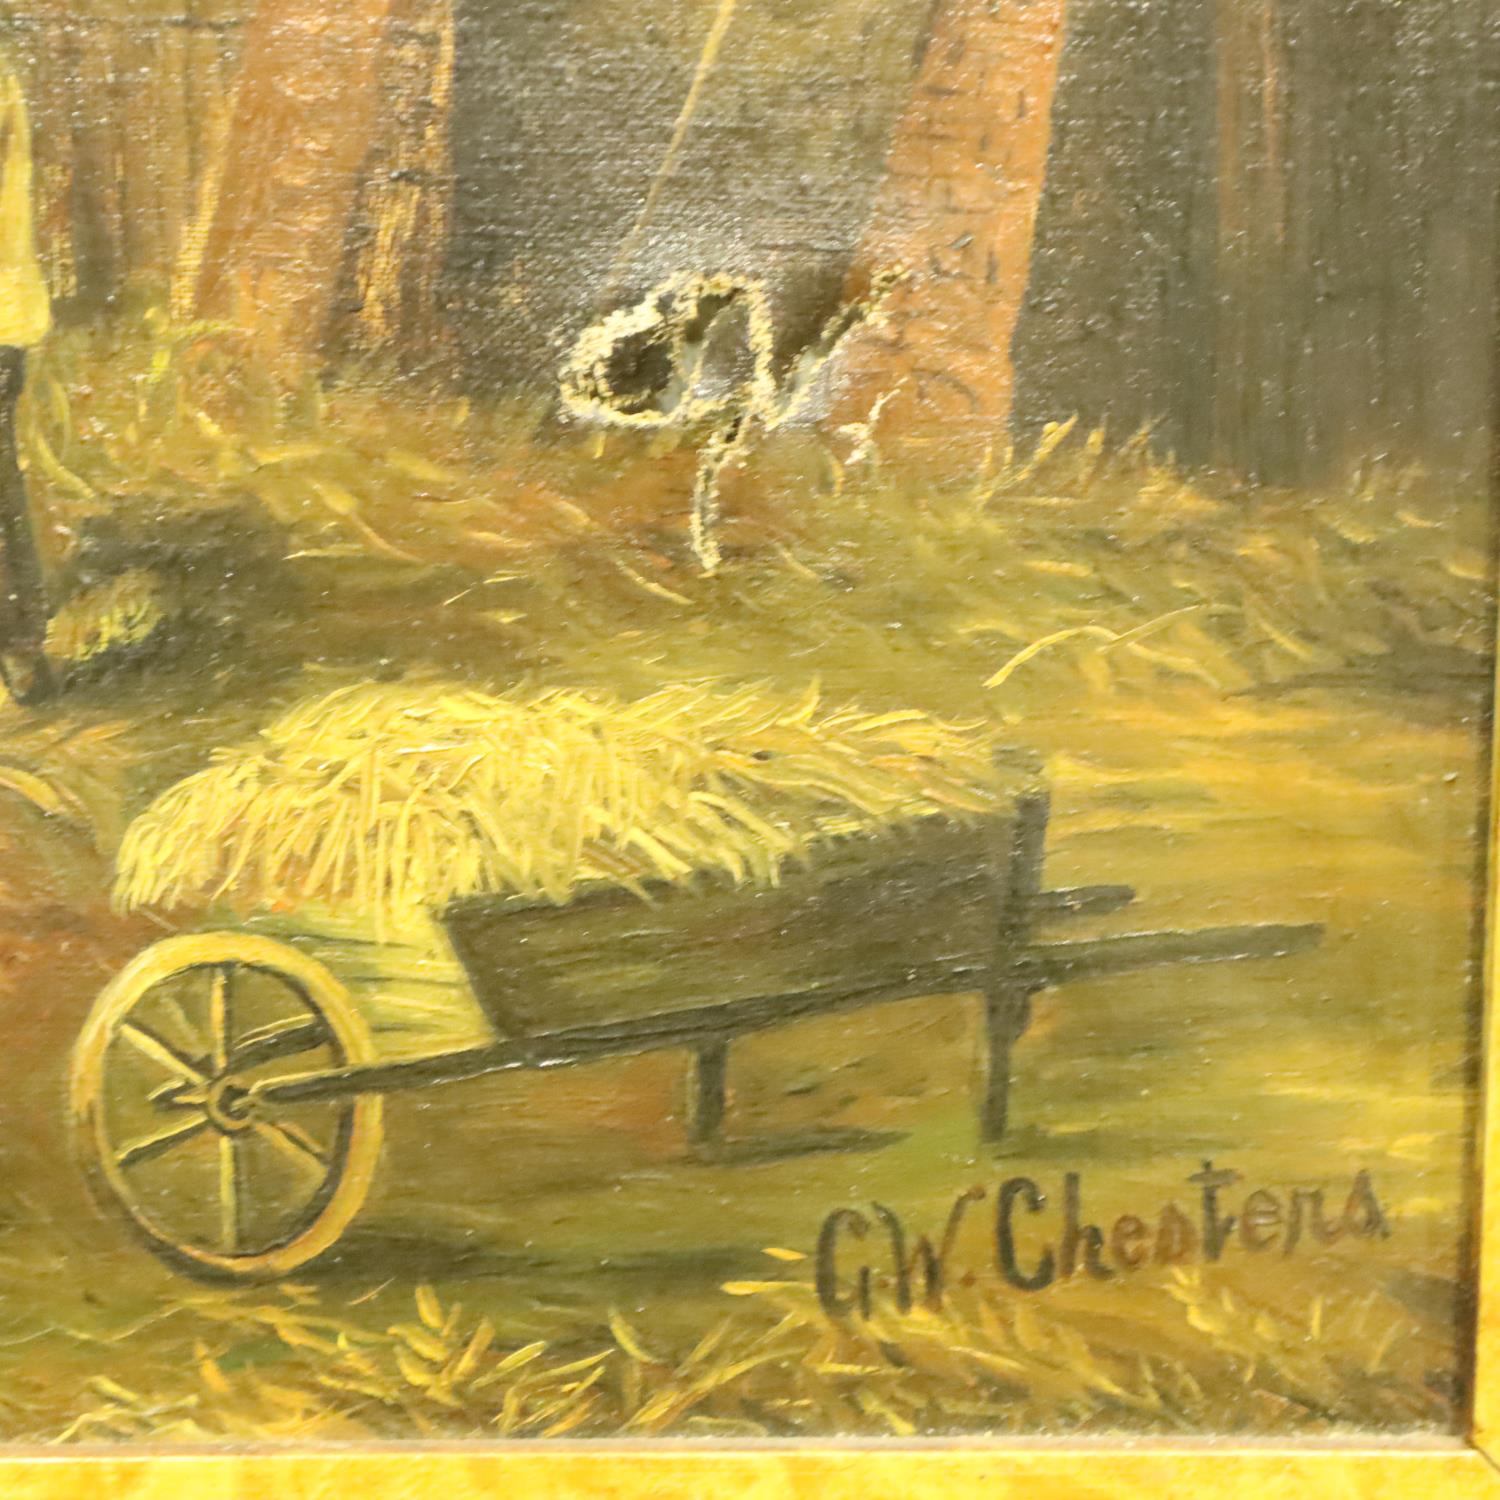 Chesters GW Chesters; 19th century oil on canvas of a farmyard scene, signed by artist, 90 x 60 - Image 3 of 9